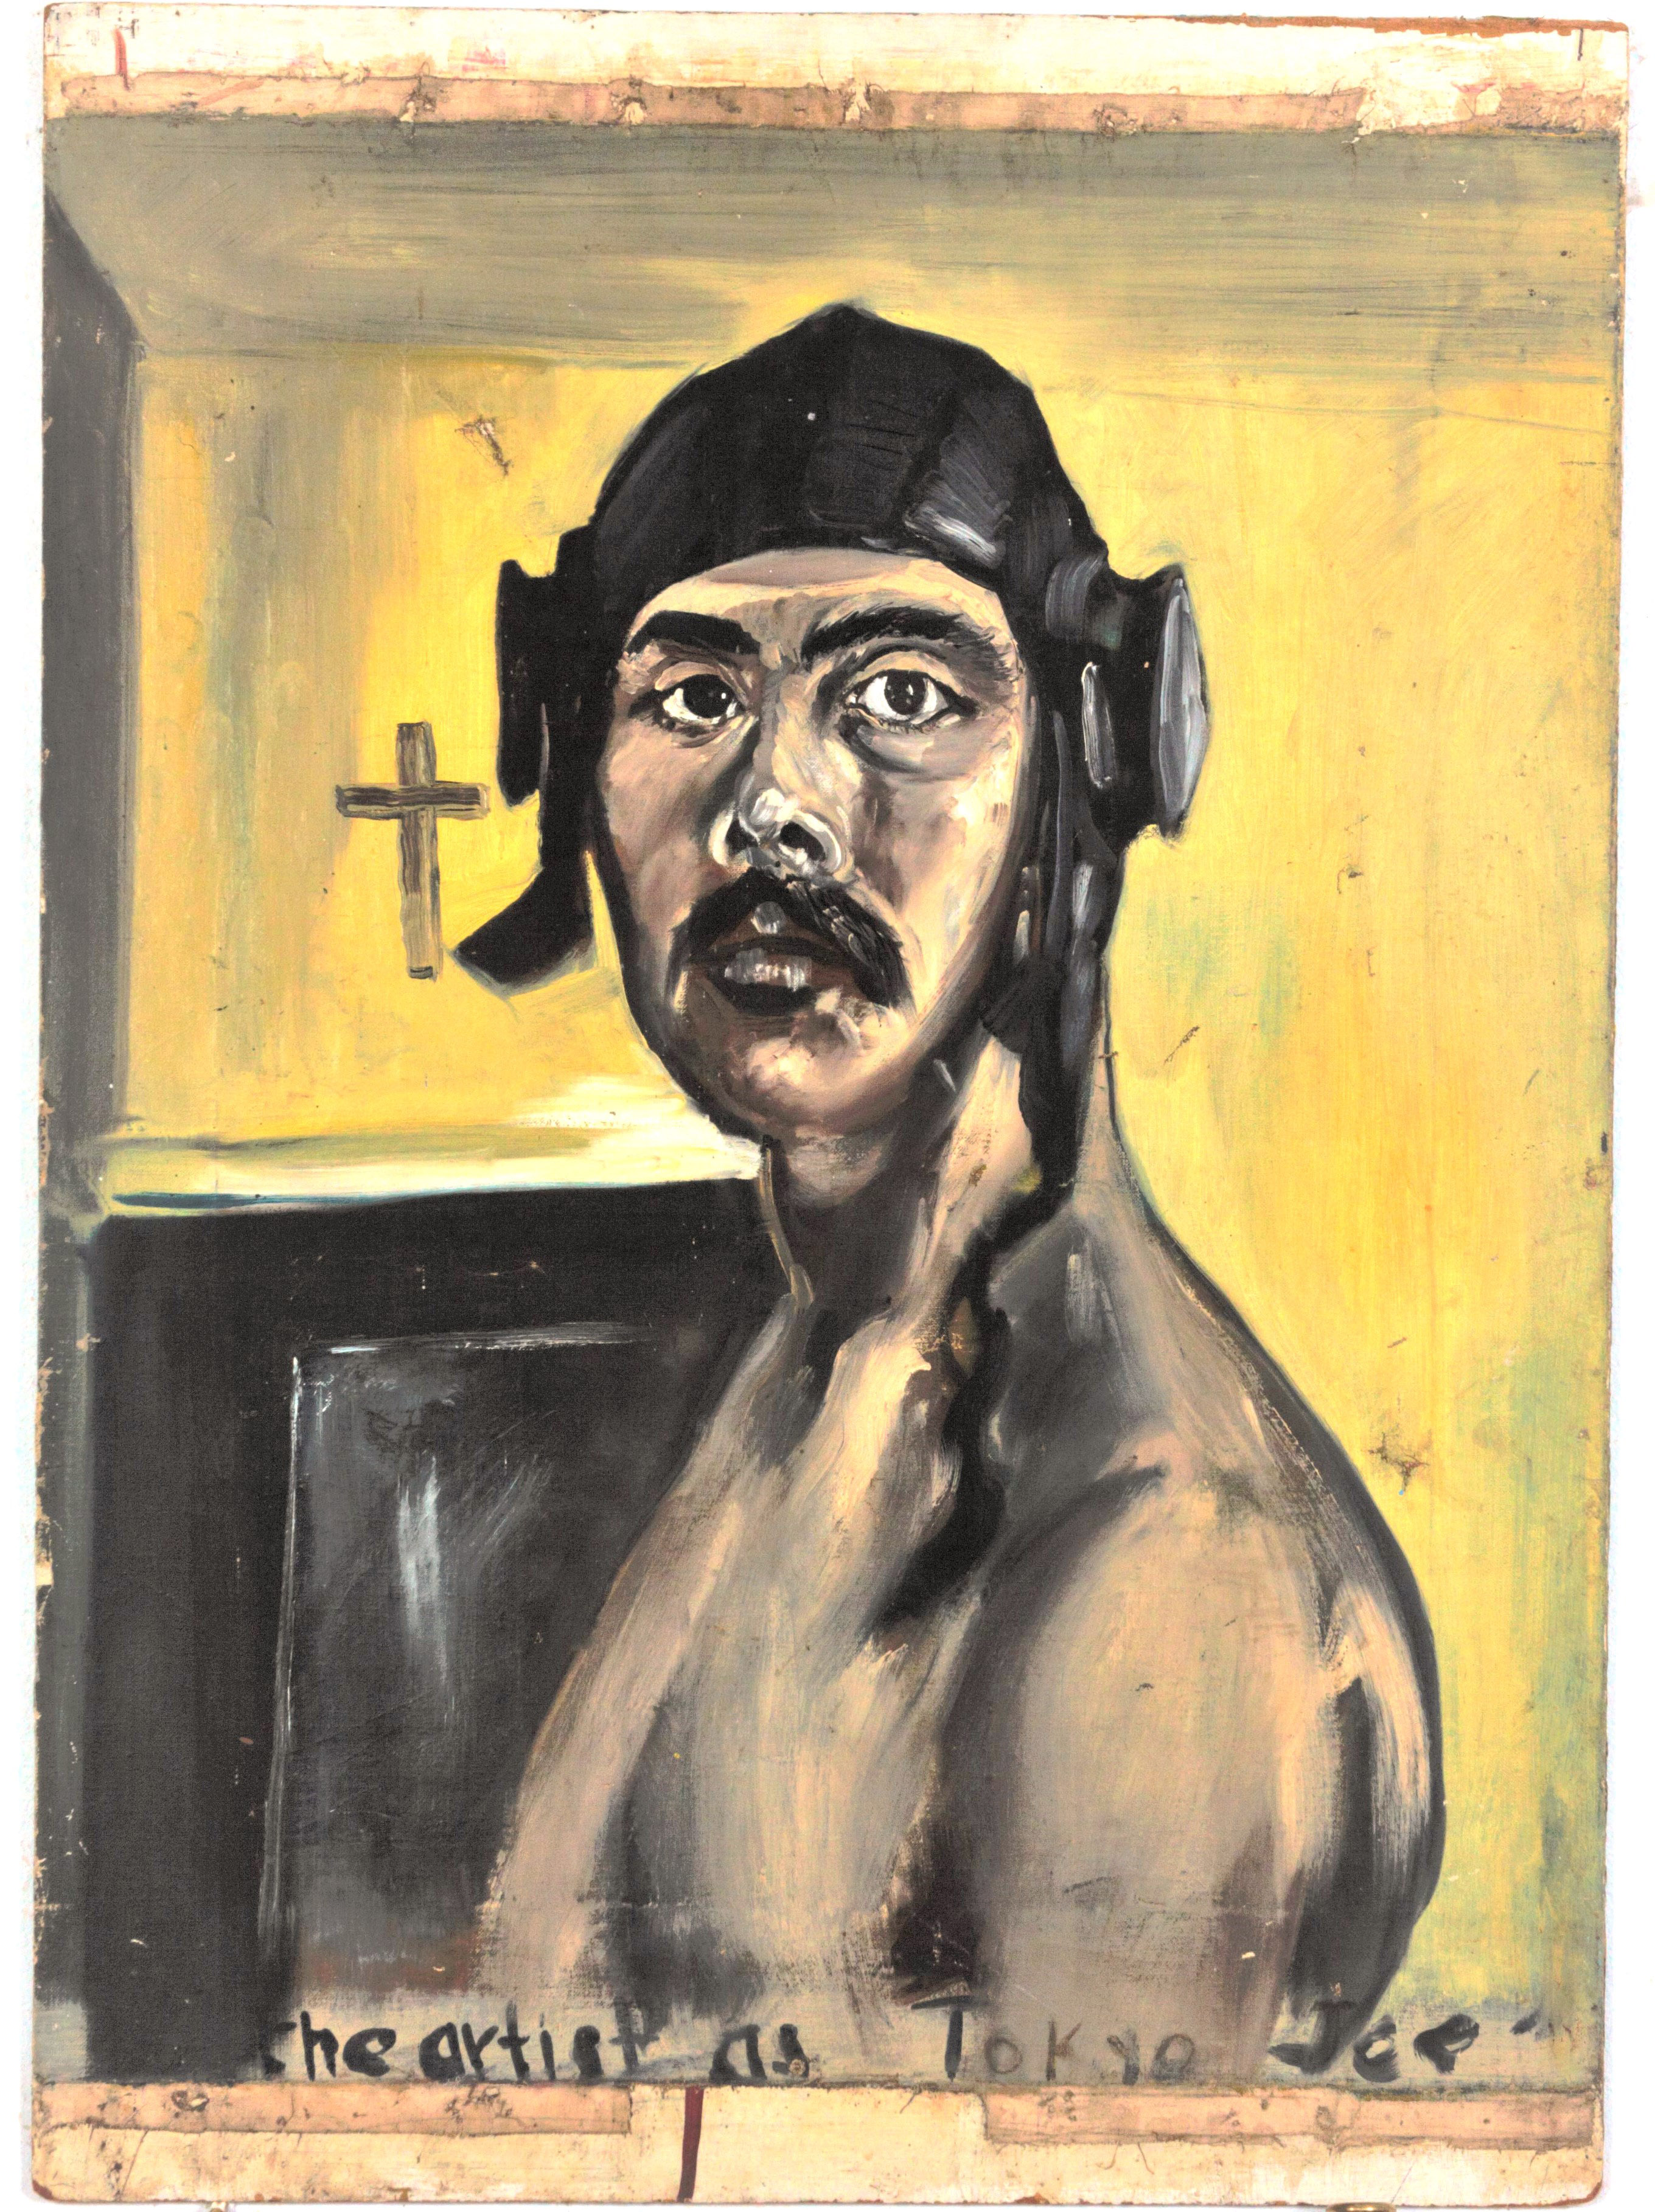 image of  Roberto Chavez, The Artist as Tokyo Joe, 1959, Oil on canvas mounted on panel, collection of the artist